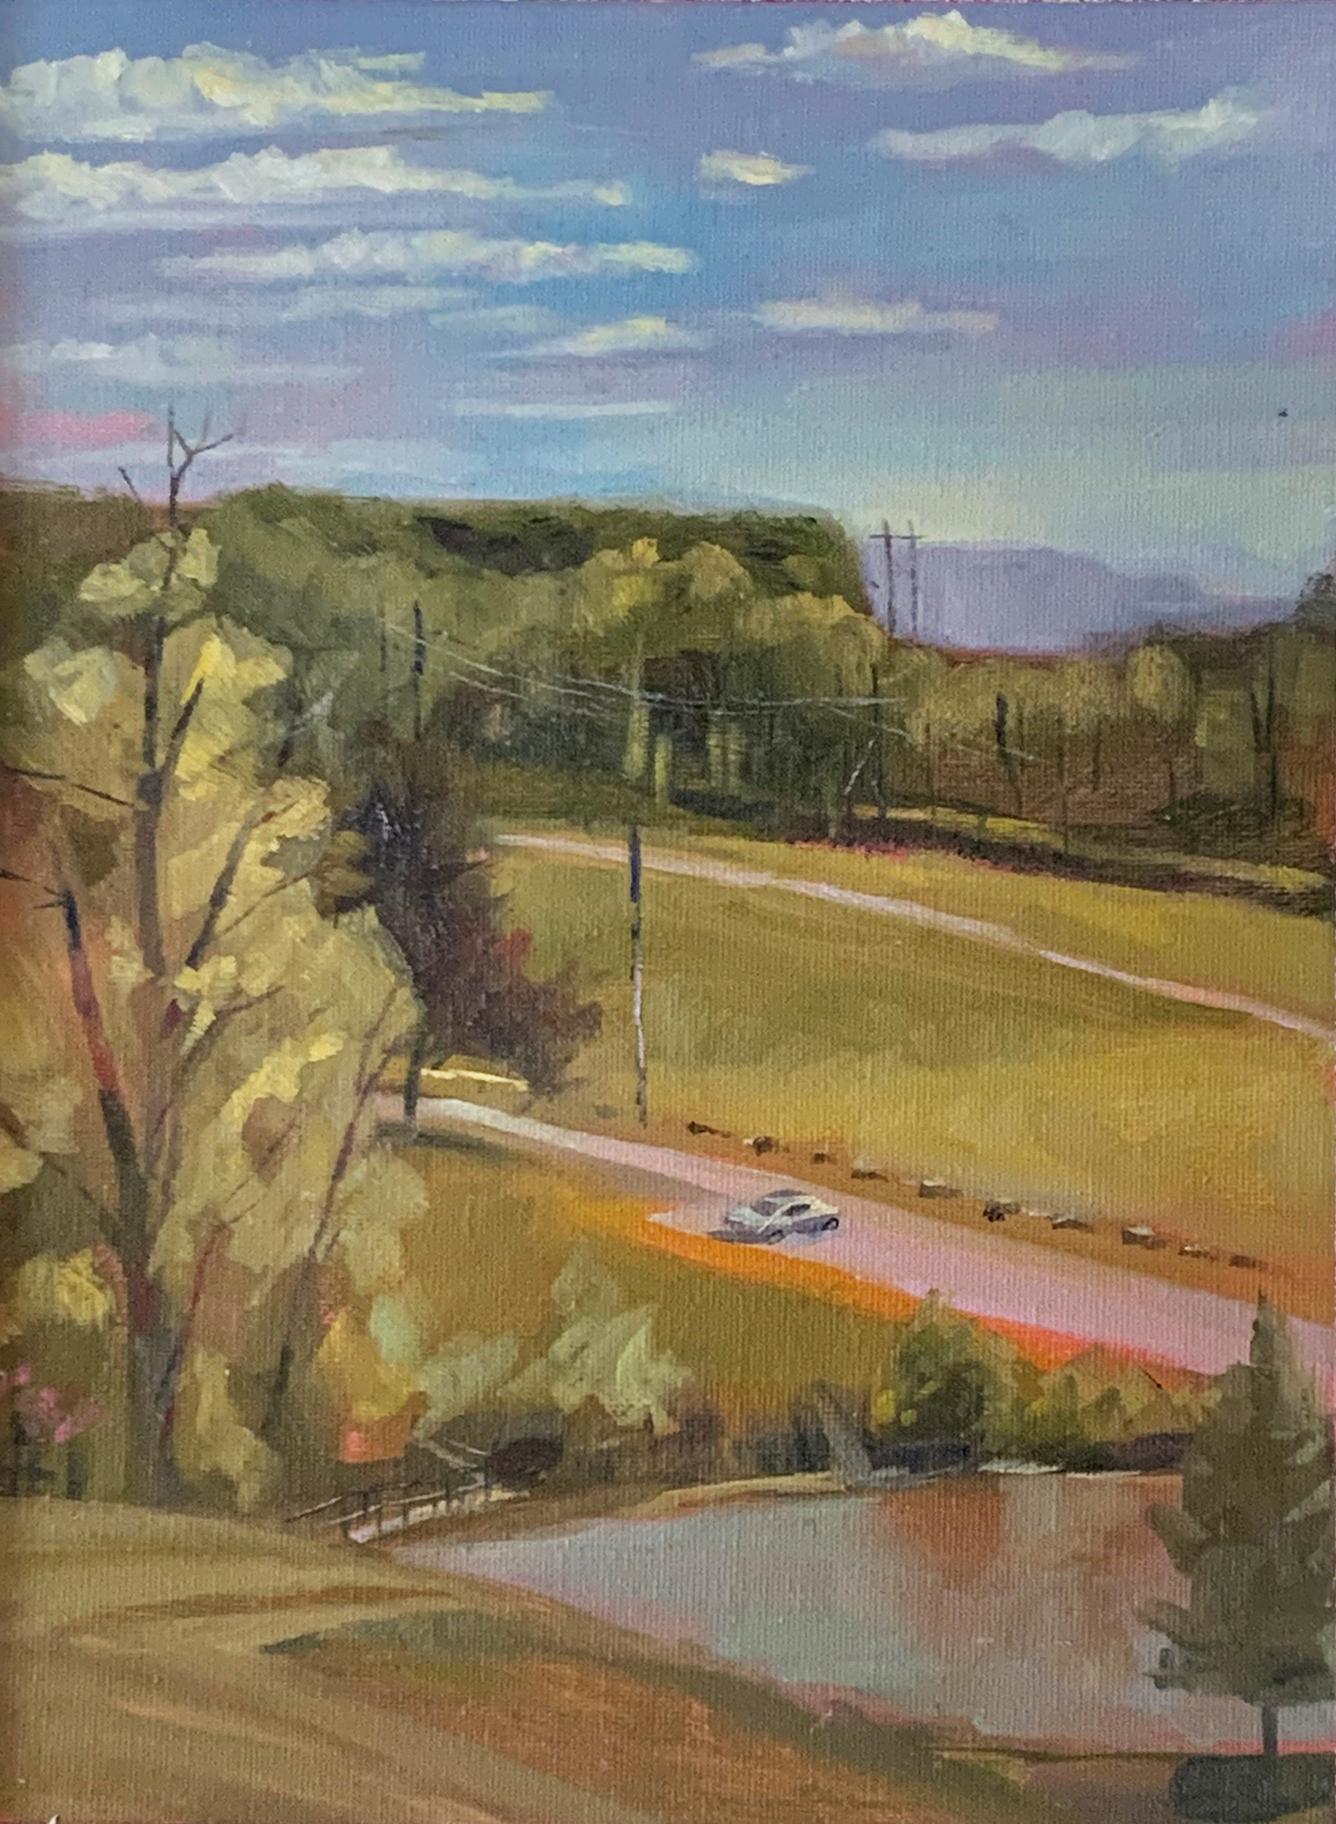 Carl Grauer Landscape Art - May 14, 2021 (Contemporary Aerial View Landscape with Parked Car, Oil on canvas)